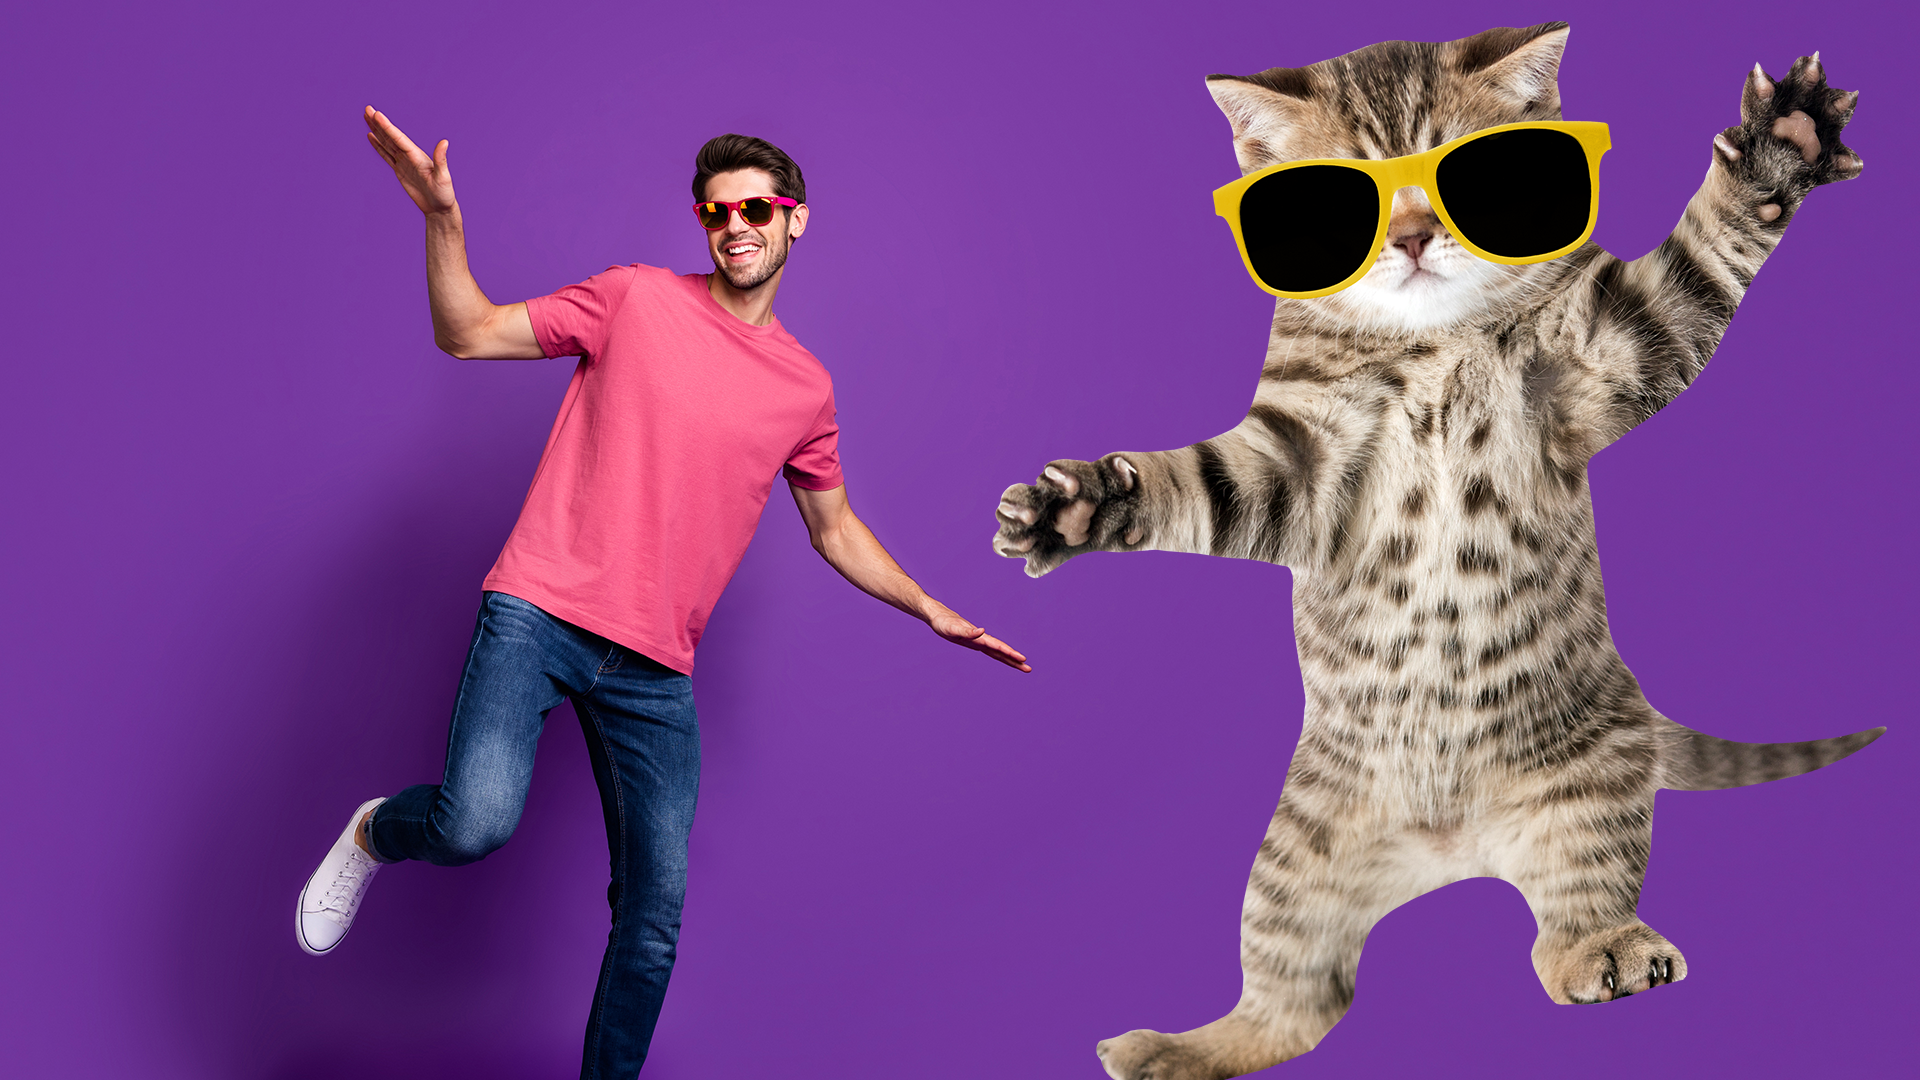 Man dancing with cool kitten on purple background 